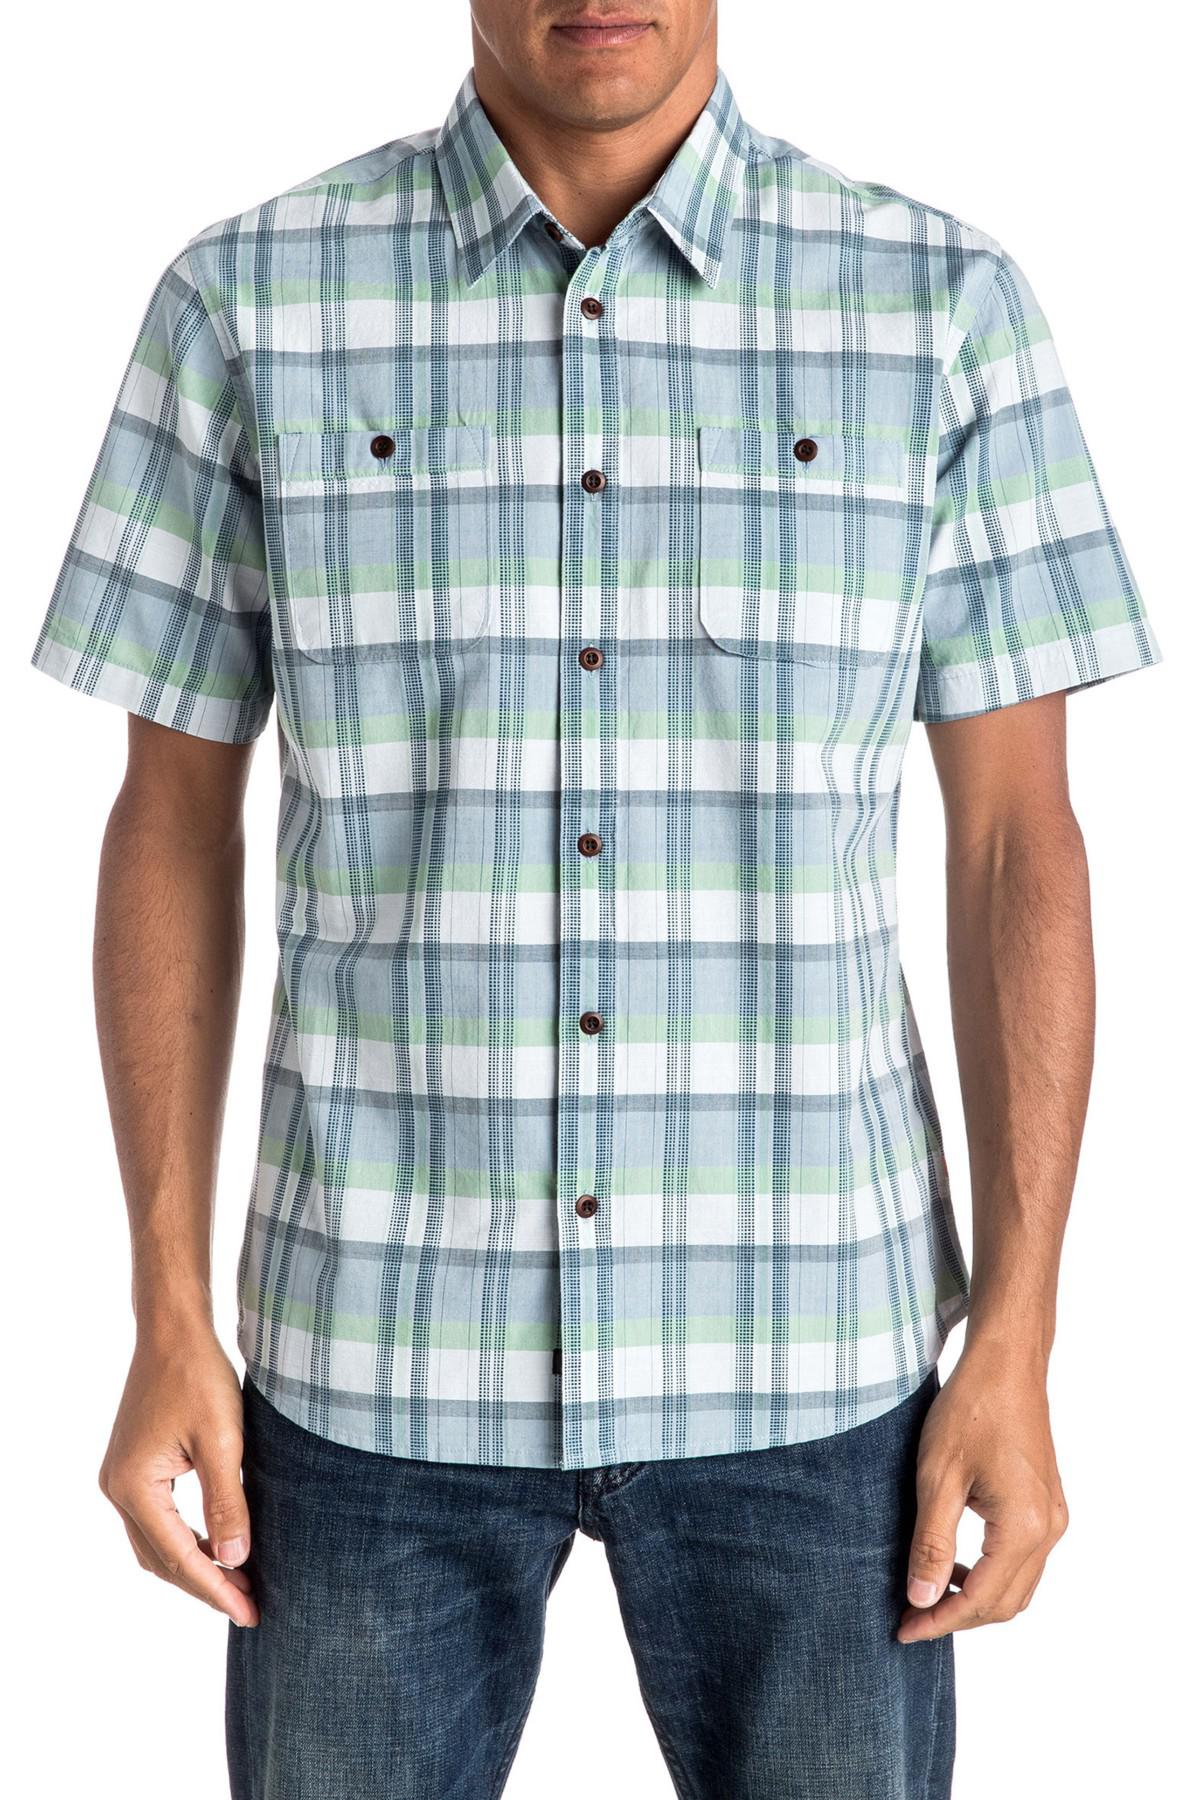 Quiksilver Waterman Collection Ample Time Regular Fit Plaid Sport Shirt ...